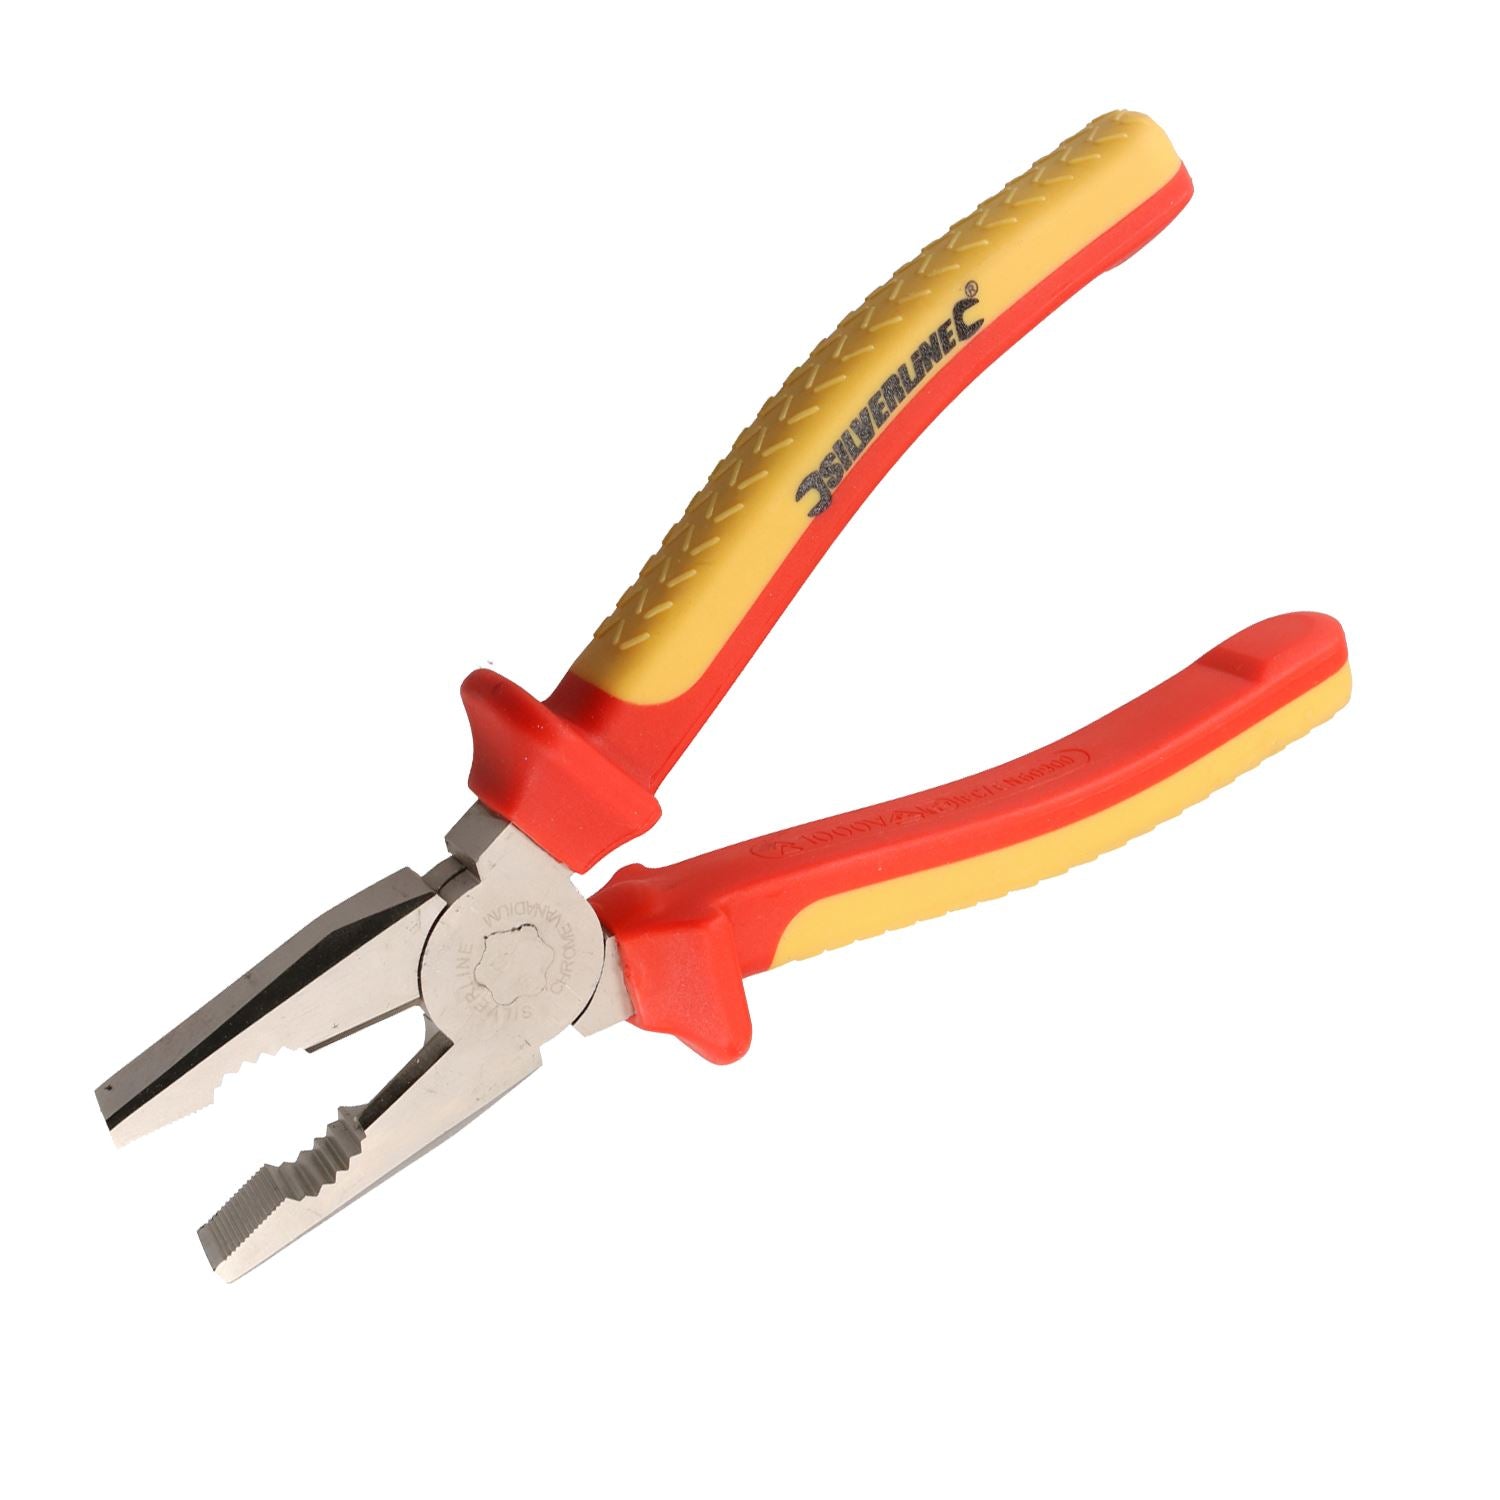 200mm VDE Soft Grip Combination Combo Pliers Insulated Electrical Electricians